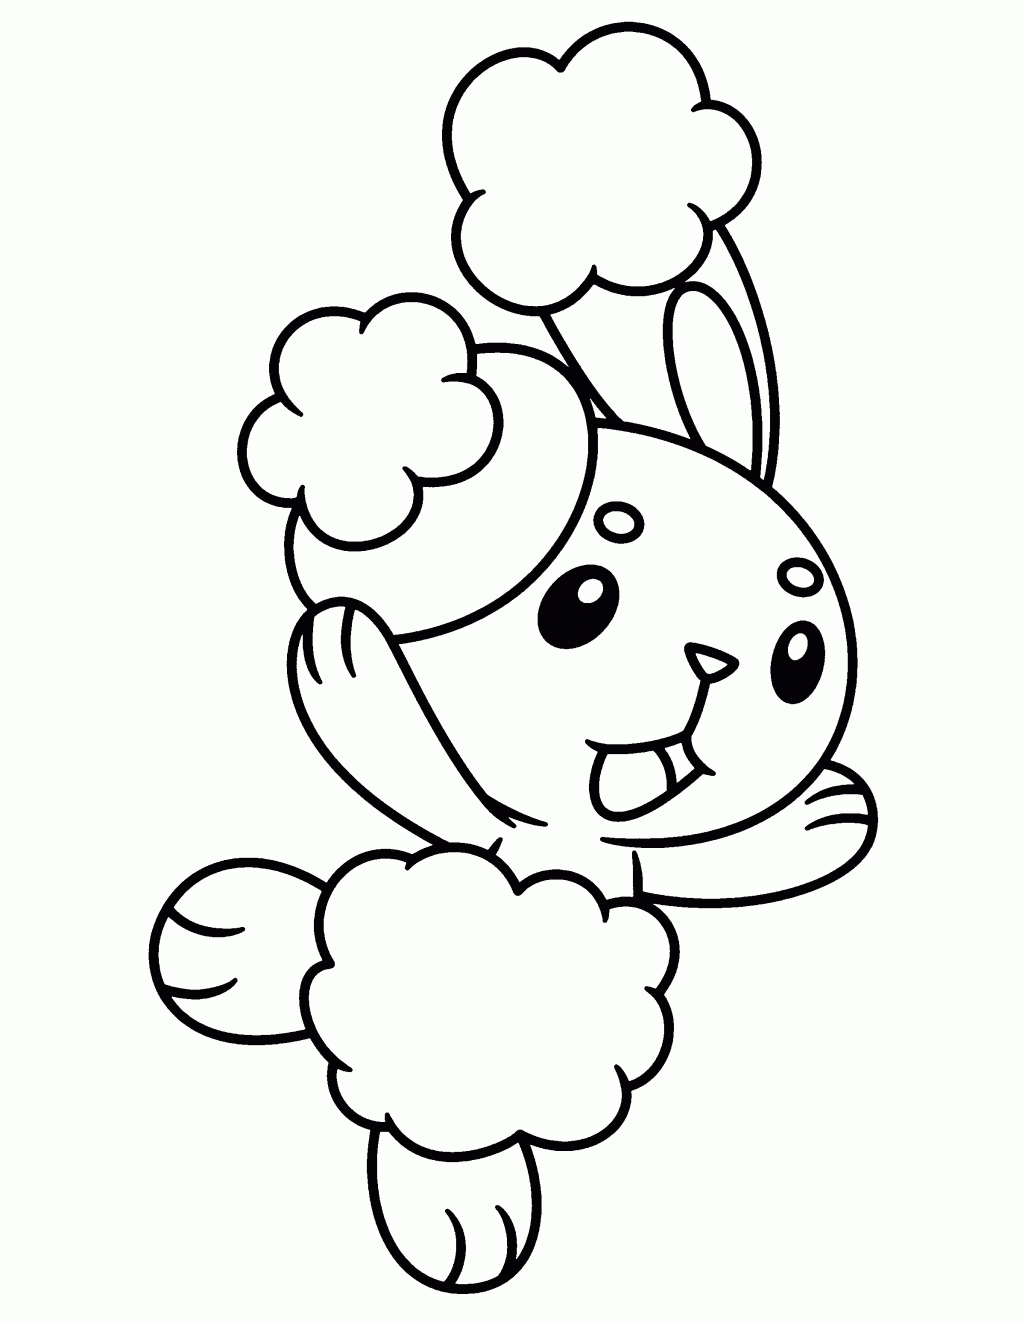 Pokemon Pictures To Print Gallery Photos Coloring Pages For ...